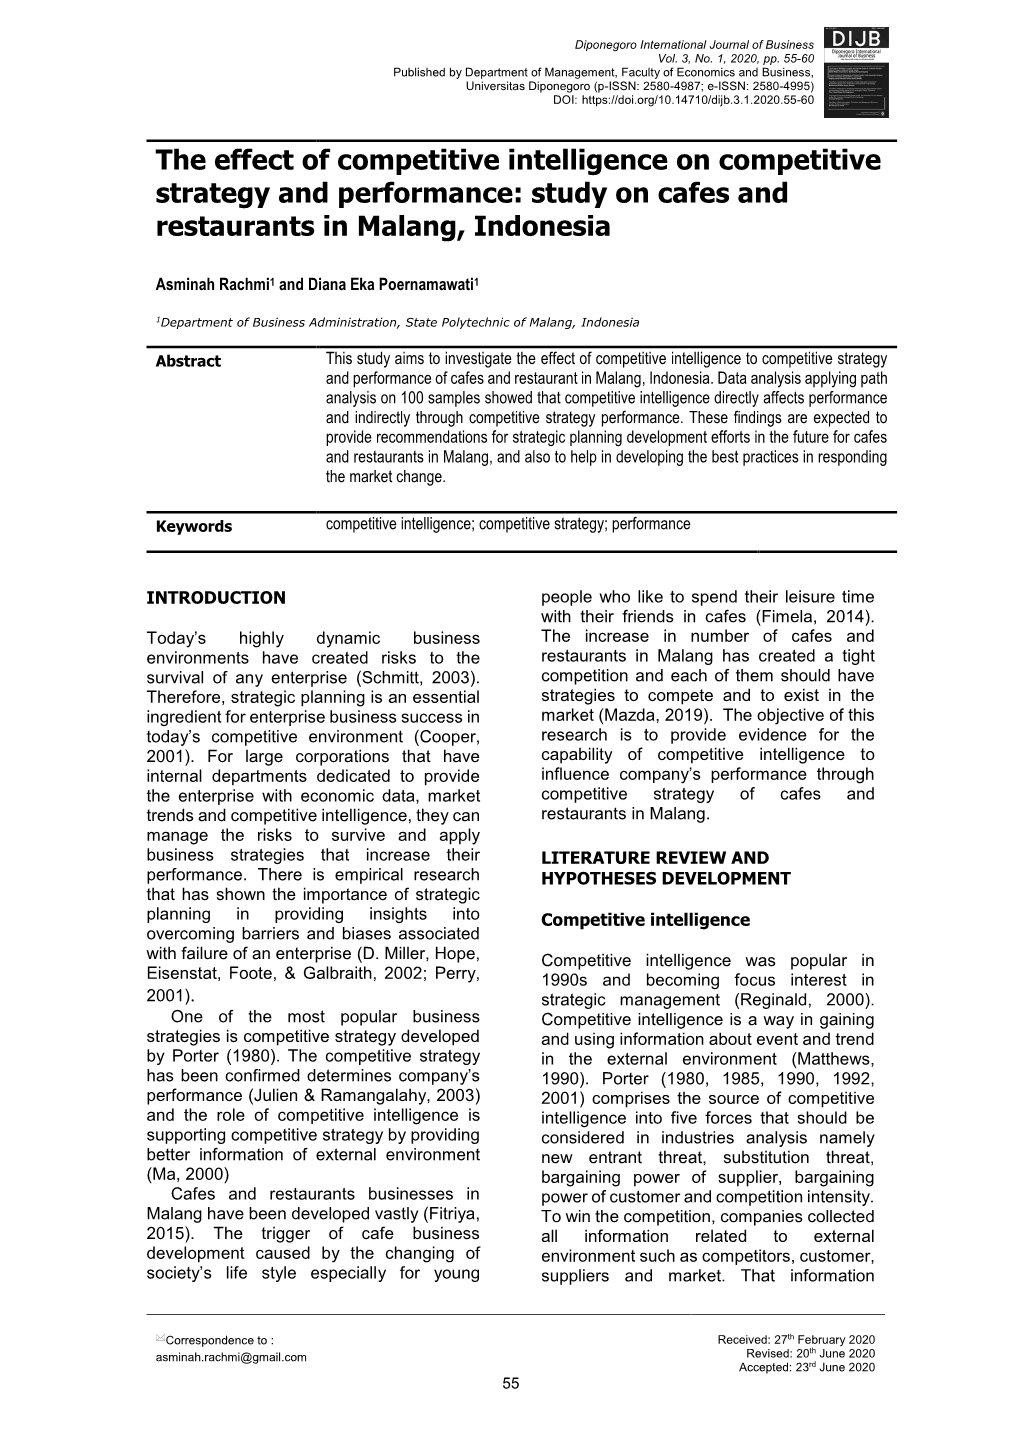 The Effect of Competitive Intelligence on Competitive Strategy and Performance: Study on Cafes and Restaurants in Malang, Indonesia